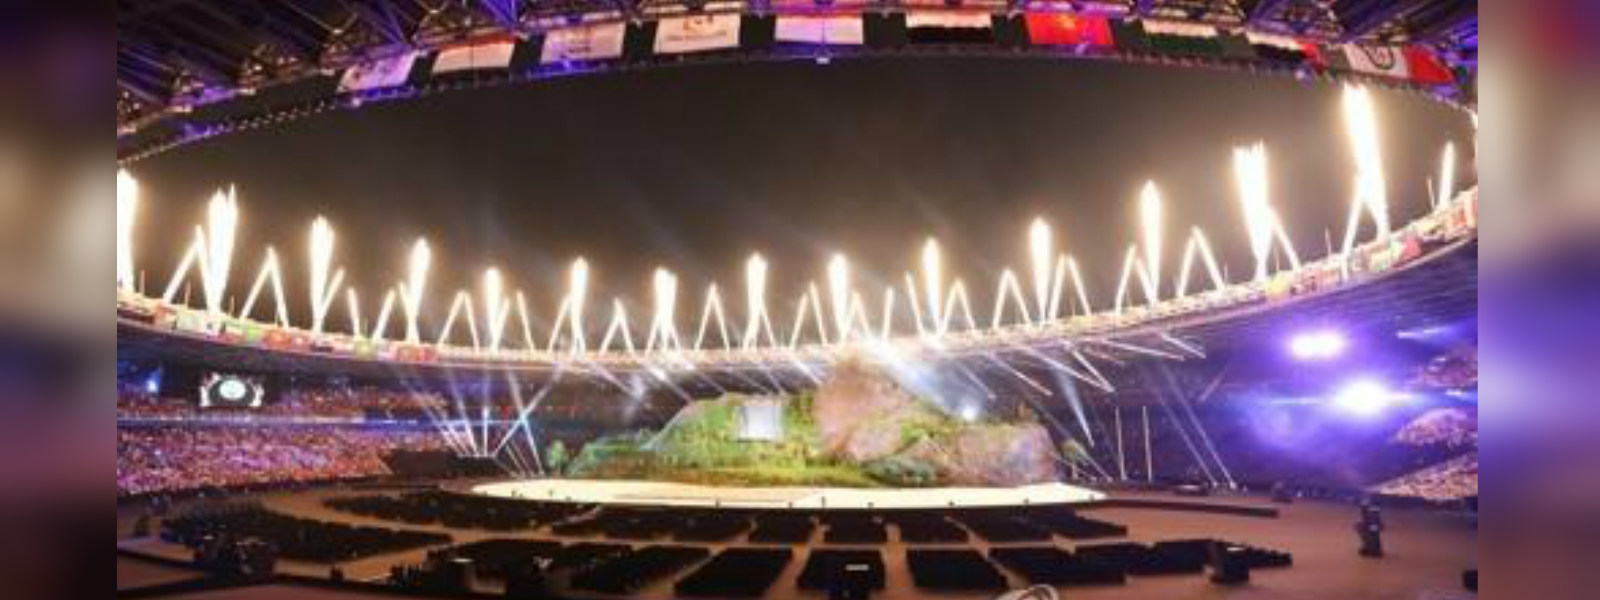 Indonesia formally open the 18th Asian Games 